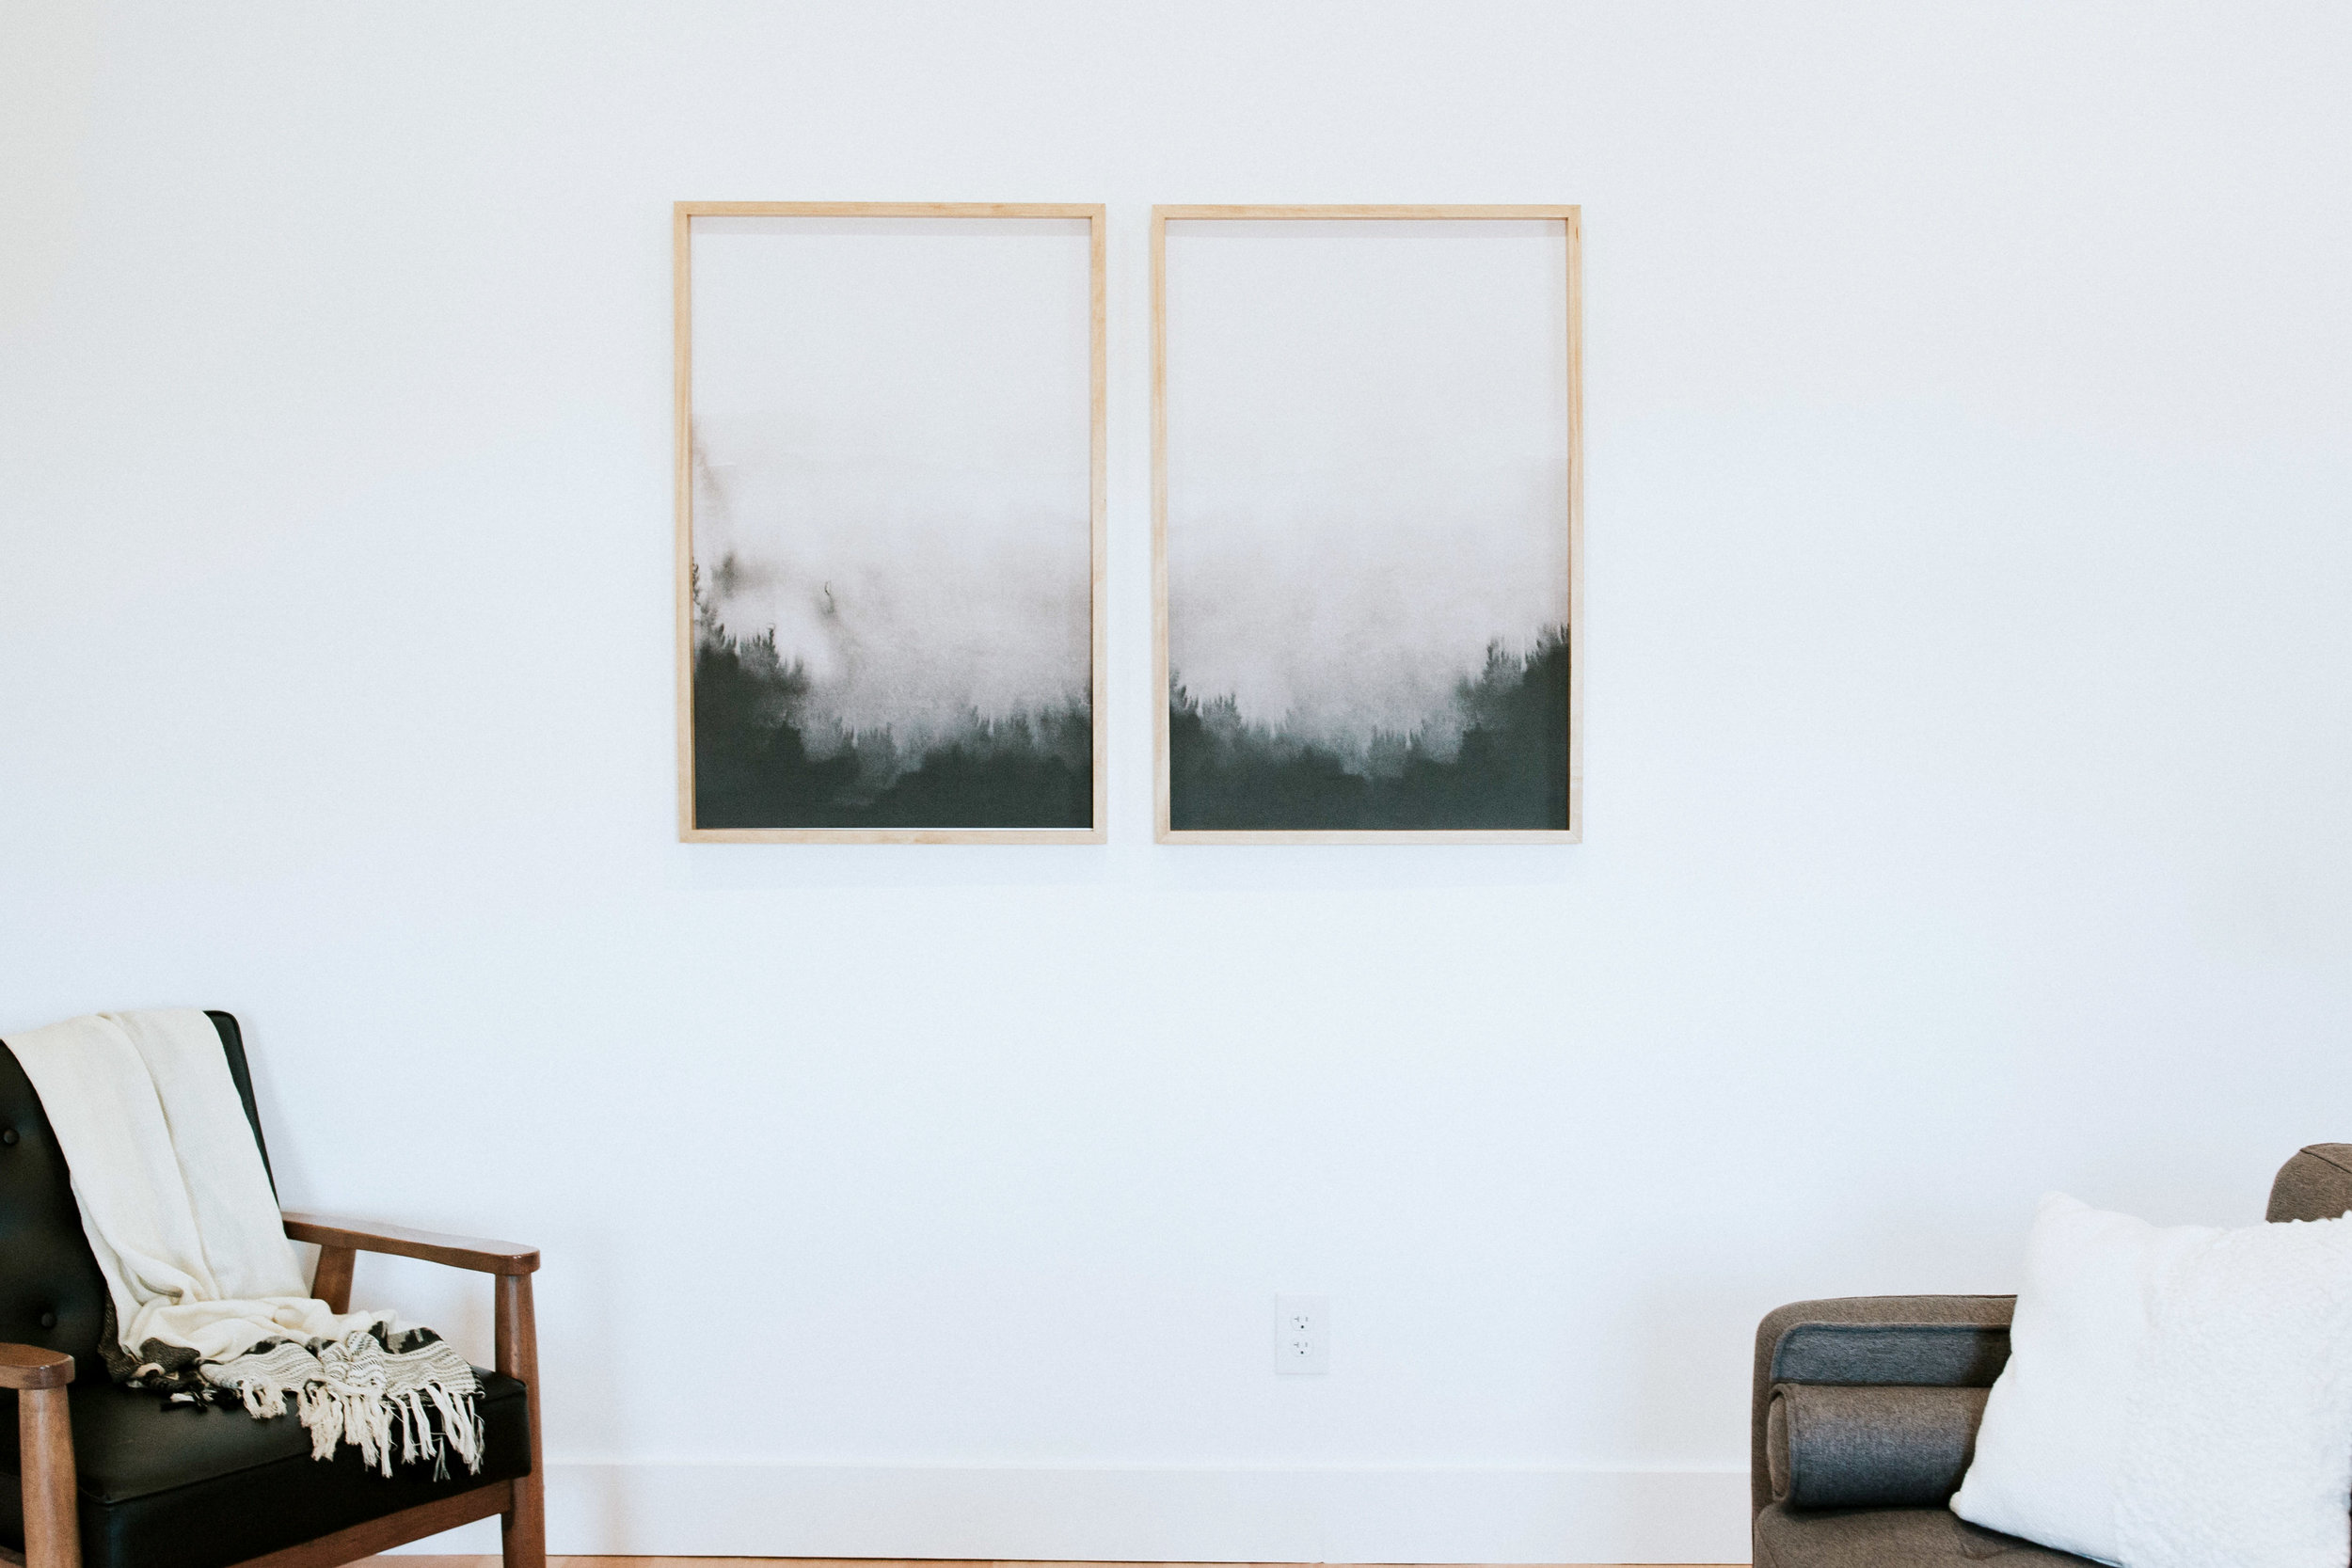 DIY modern frame and abstract art - how to make your own frame